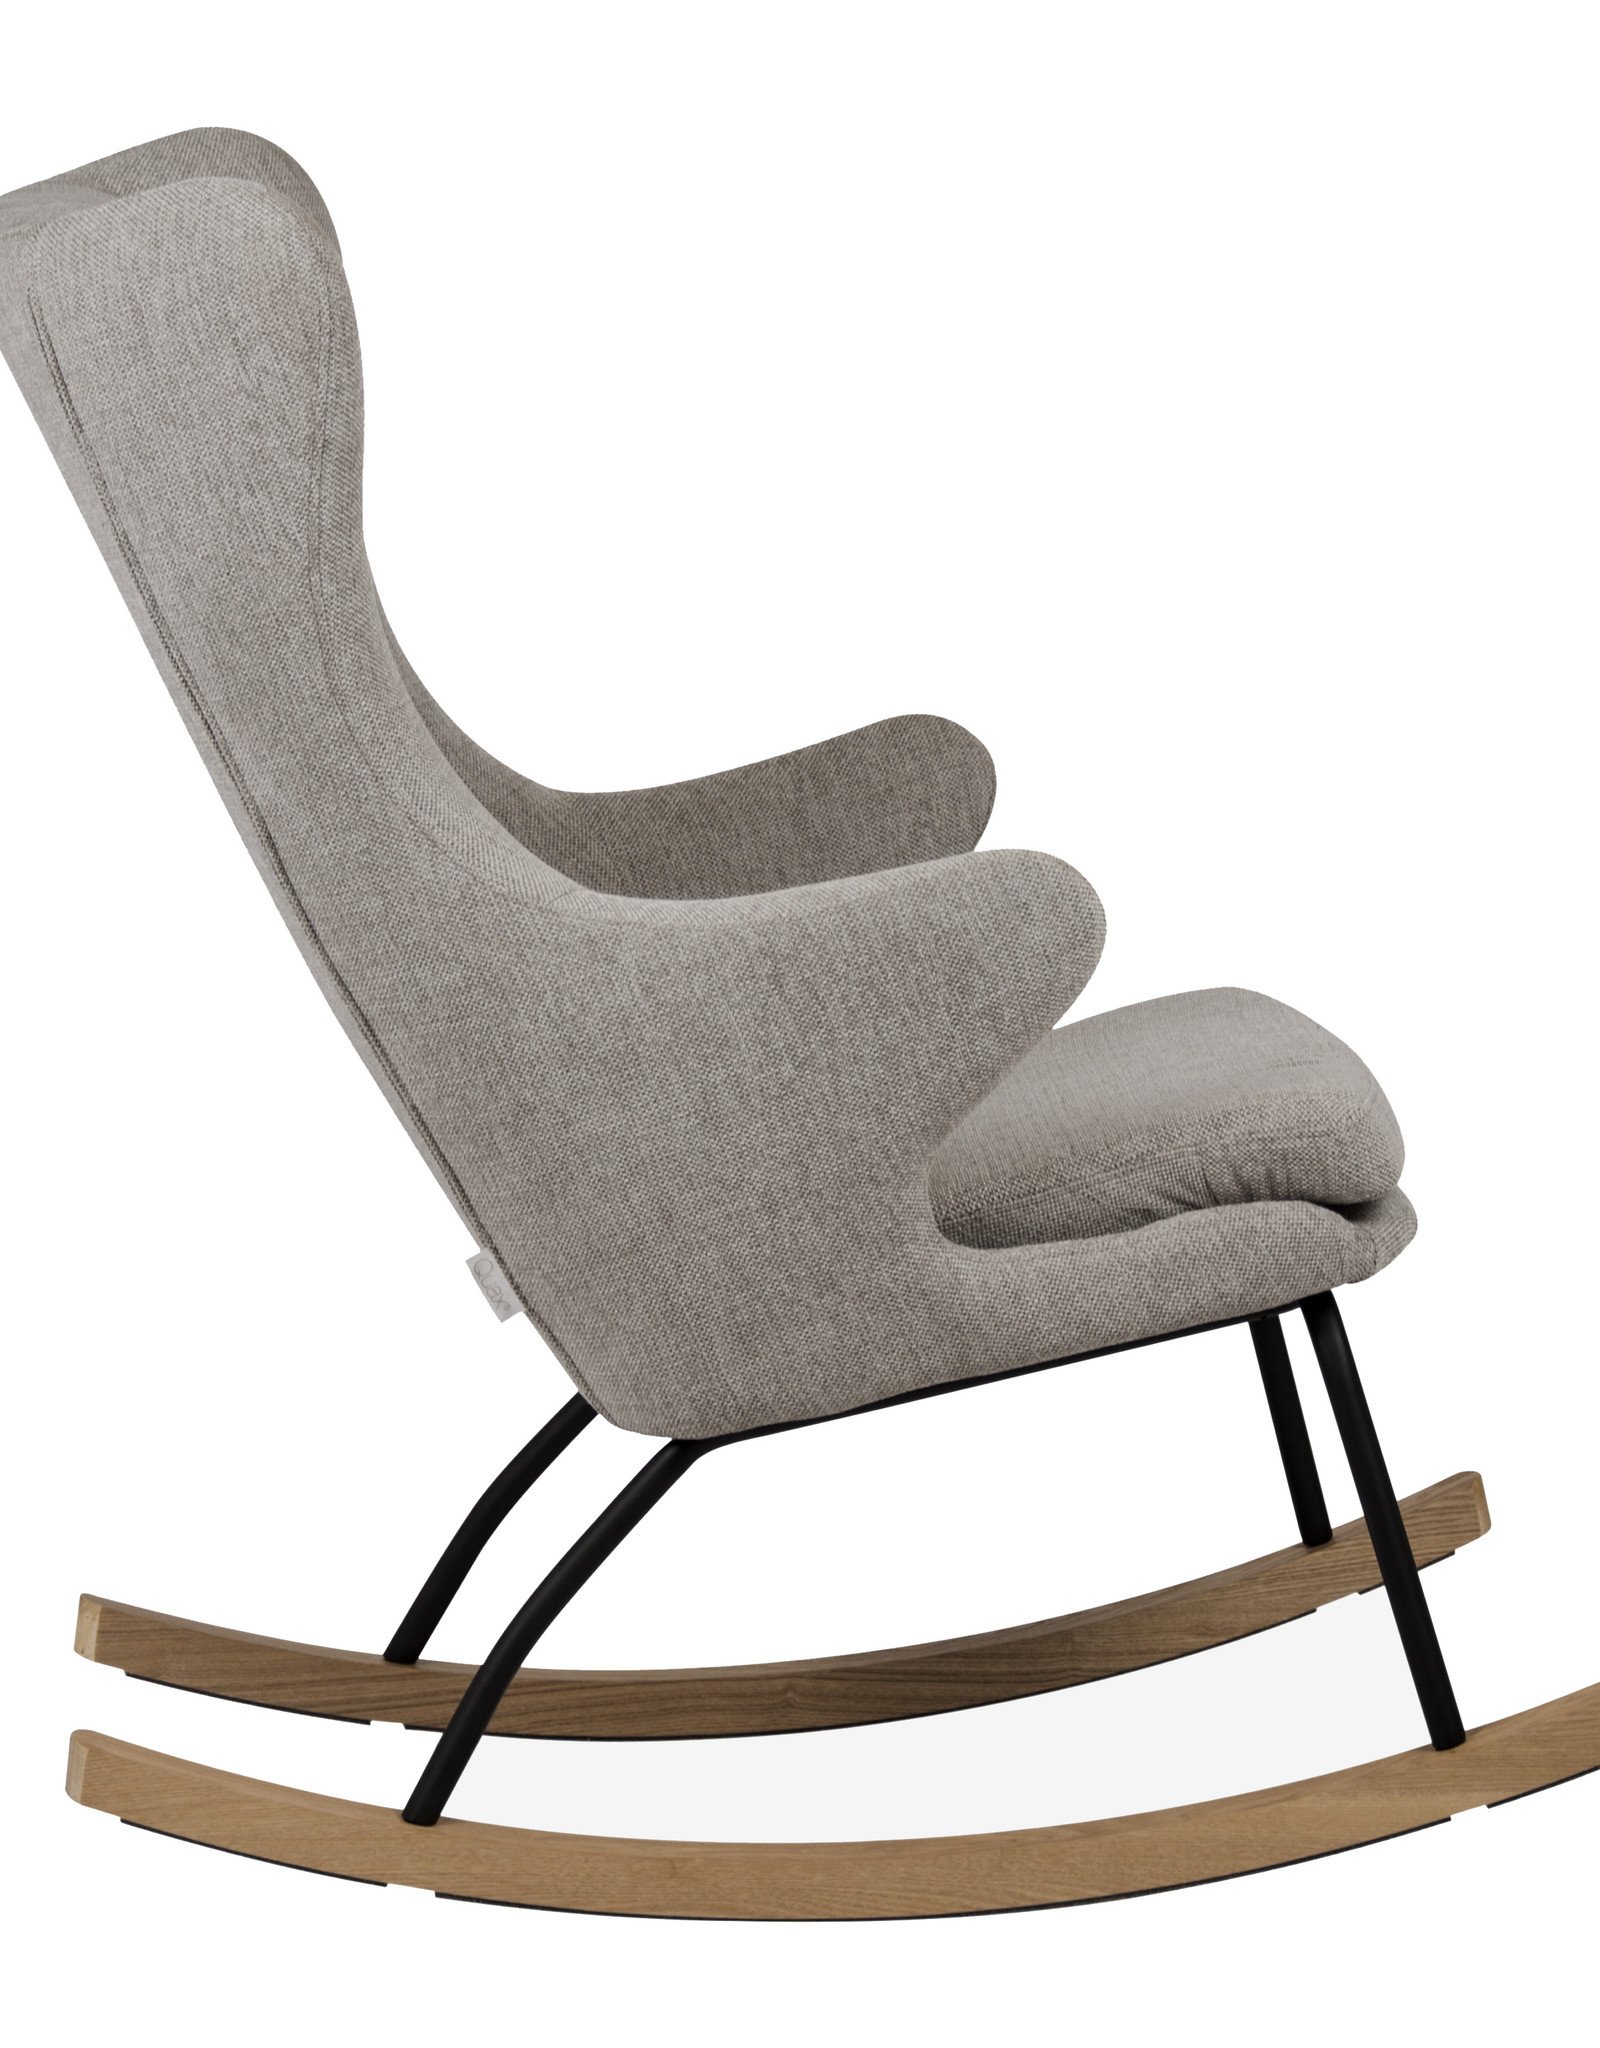 Quax Rocking Adult Chair De Luxe - Sand Grey